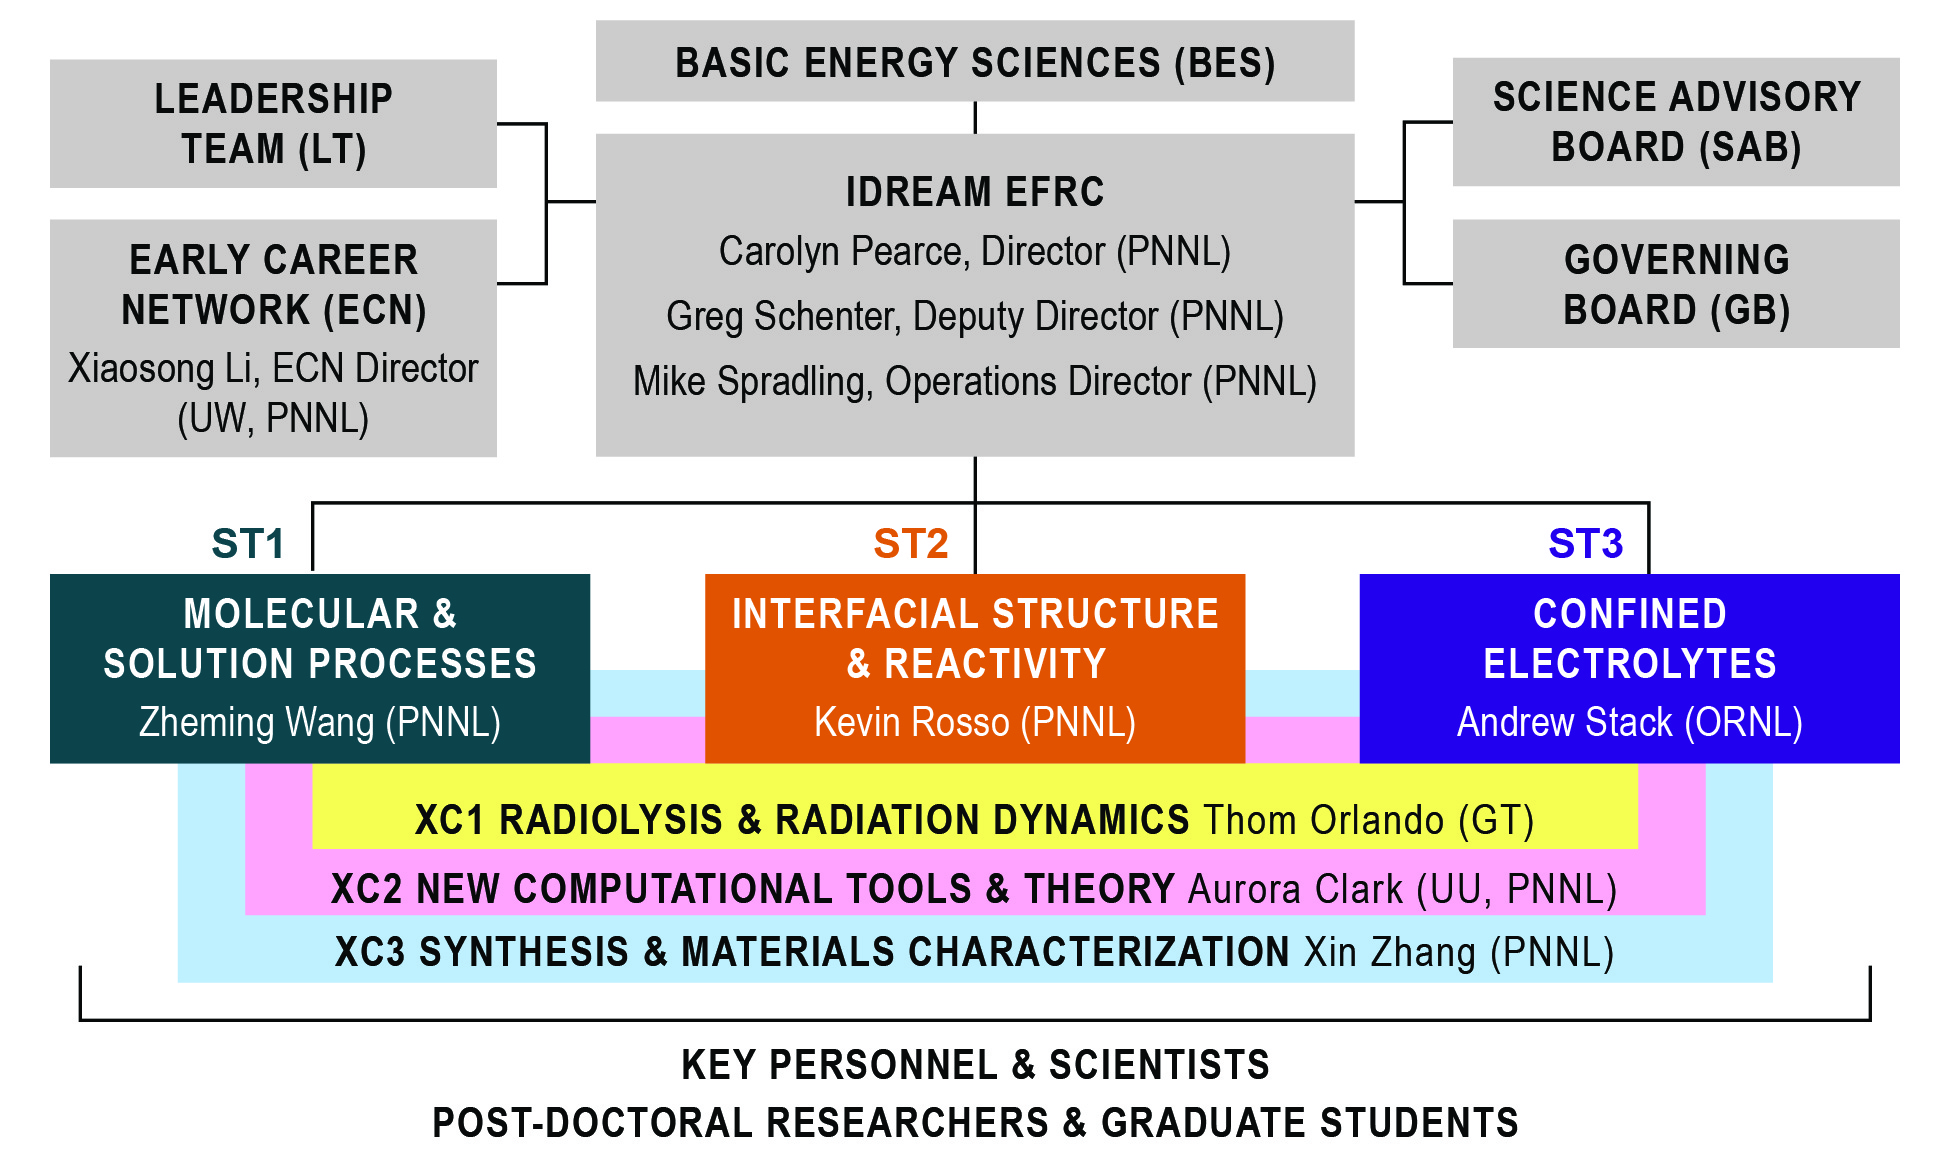 organization chart showing the structure and key leaders for the IDREAM EFRC effective August 2022